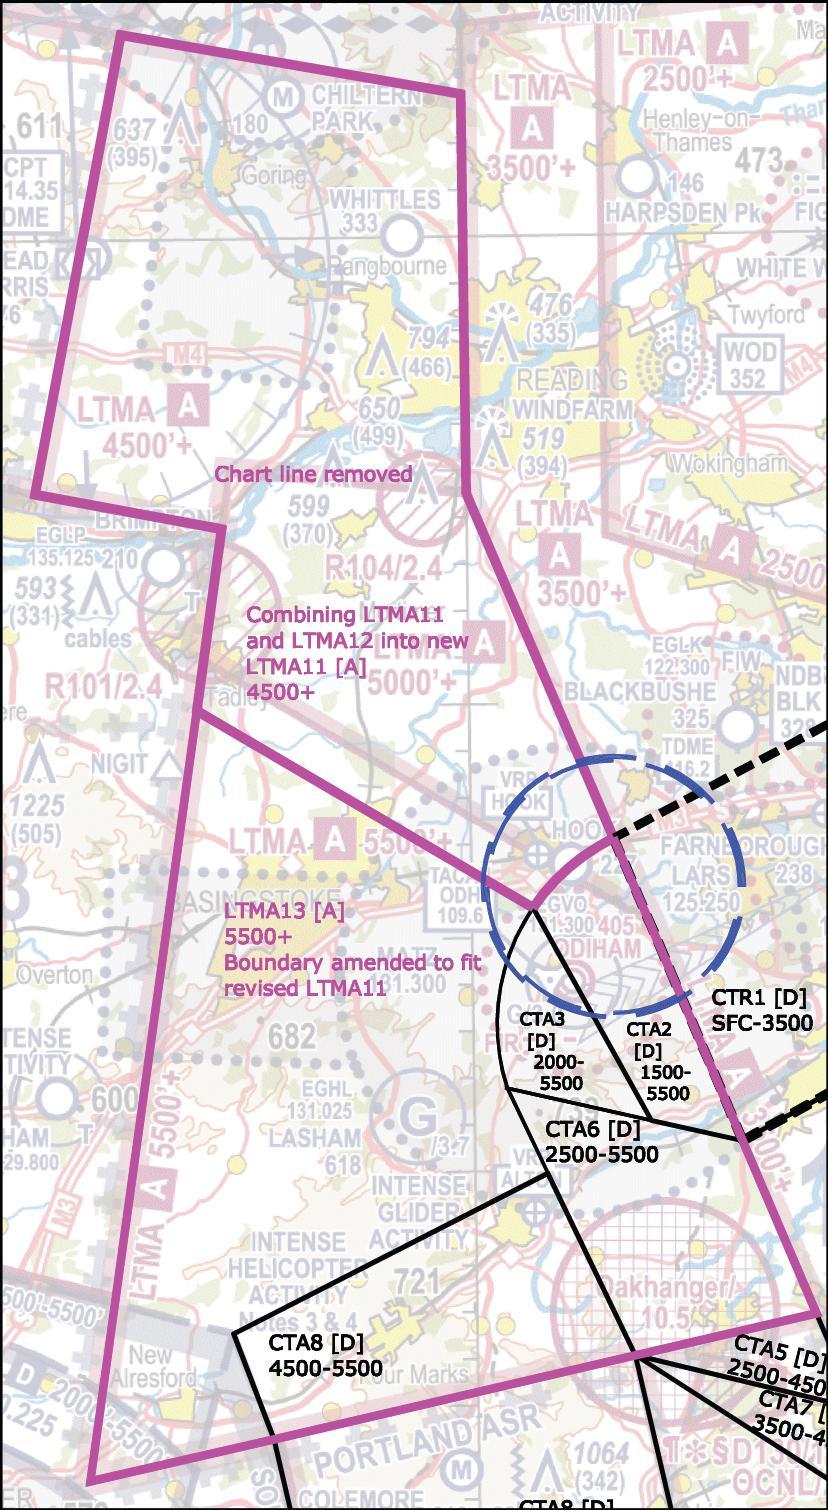 We originally consulted upon Class D in the area beneath, and adjacent to, LTMA12. The decision was made at the time with the best intentions and knowledge.